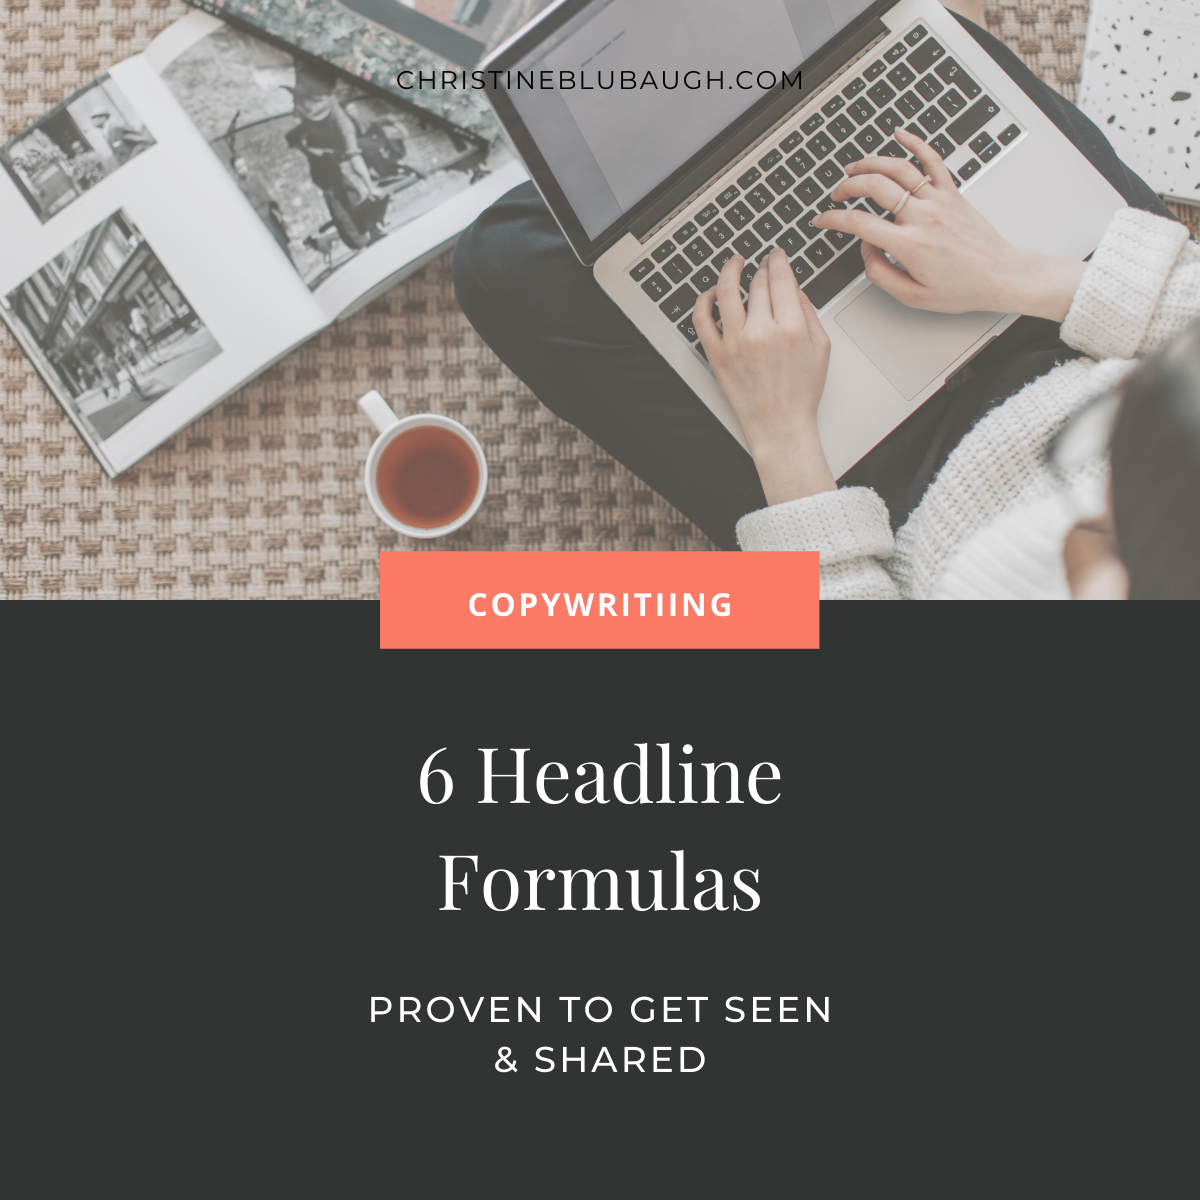 6 Headline Formulas Proven to Get Content Seen & Shared